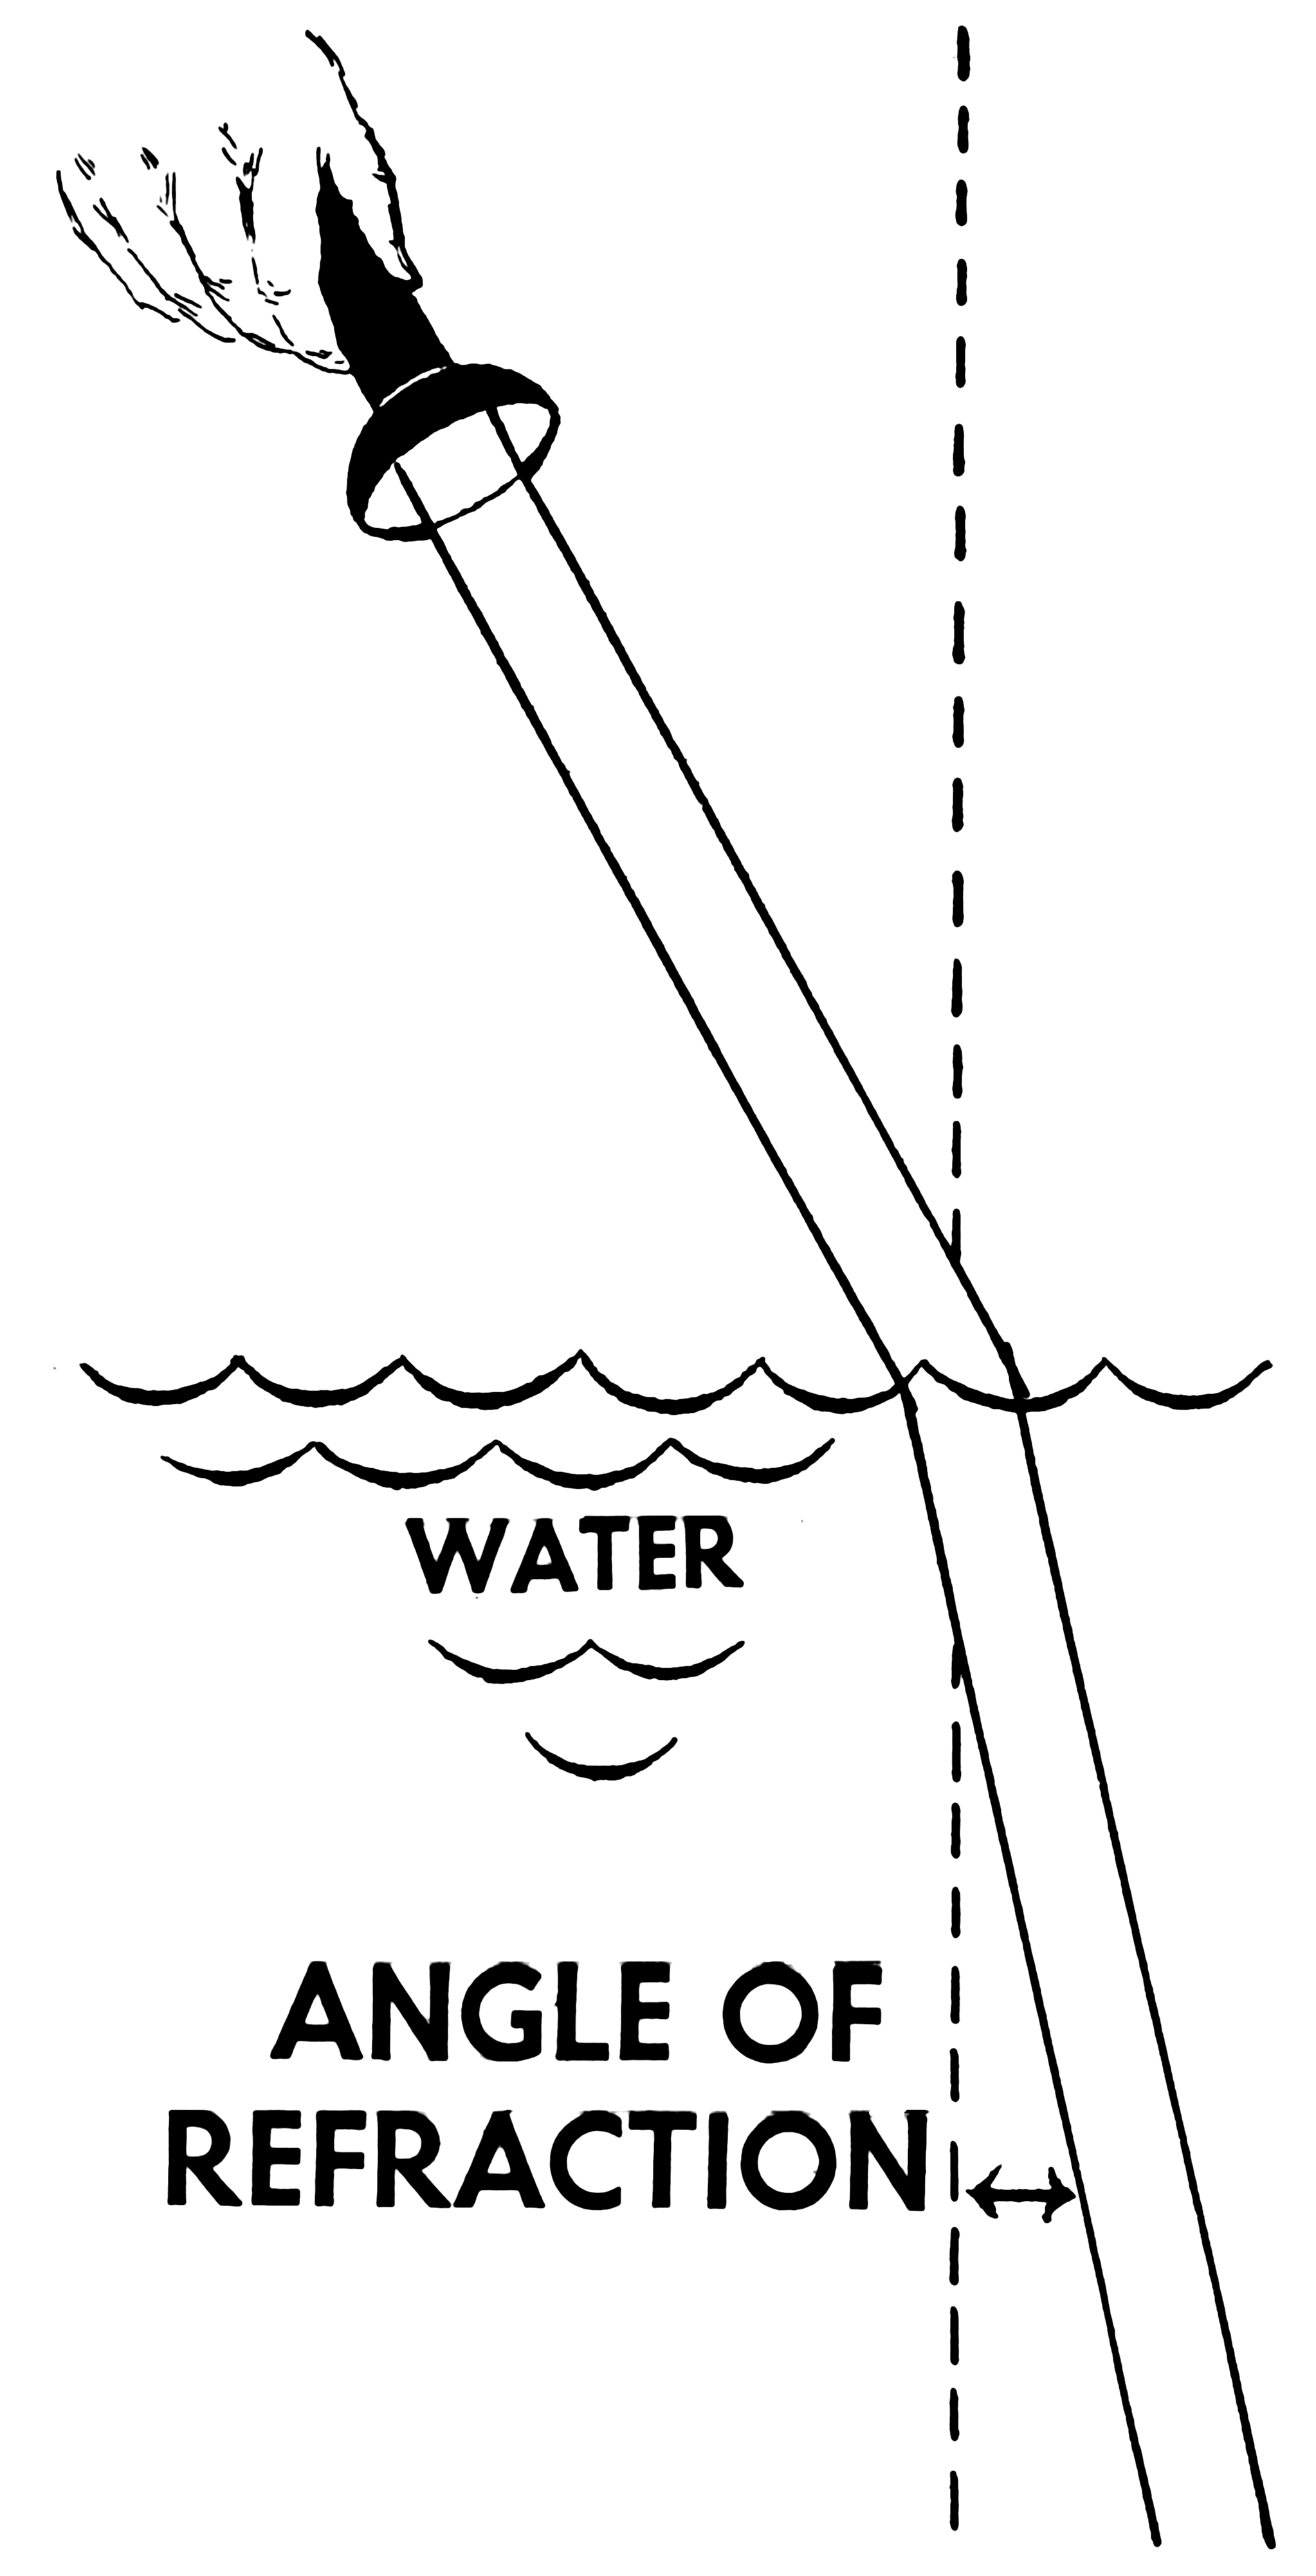 Angle of Refraction Definition Image